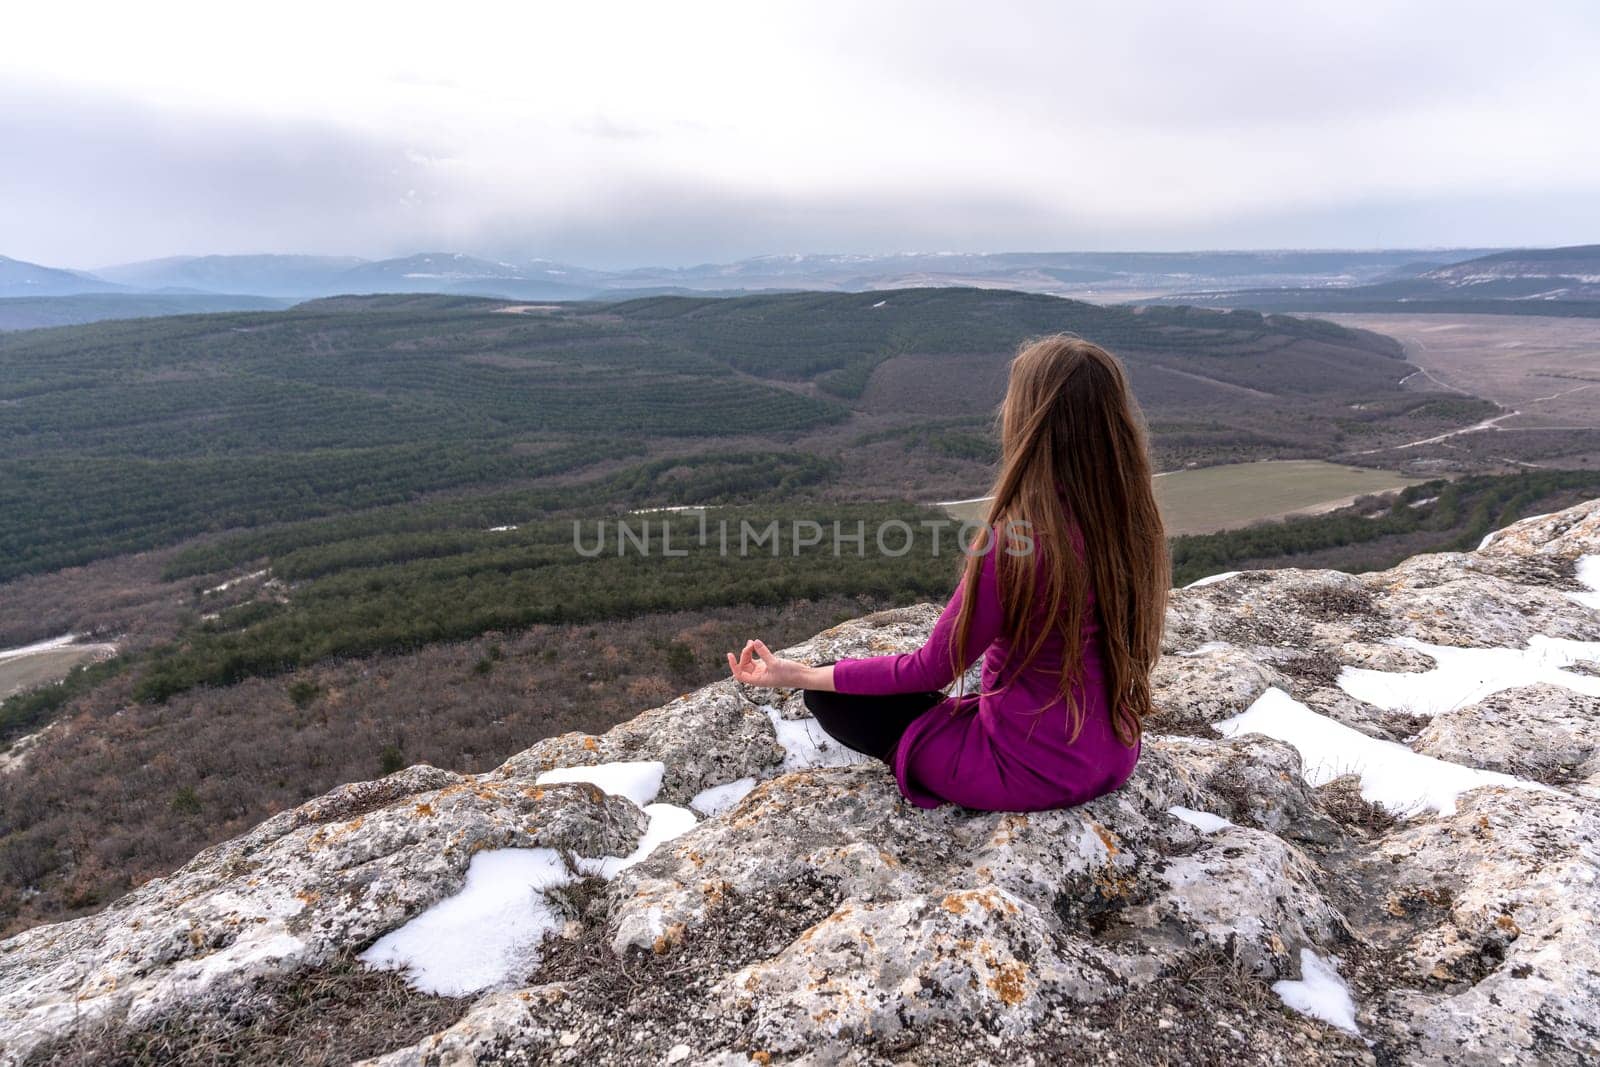 A beautiful woman sits in a lotus position on a high place with an amazing view of the mountains and the gorge practicing yoga meditation Kundalini energy thinking intuition prana. Loneliness harmony mental freedom concept.